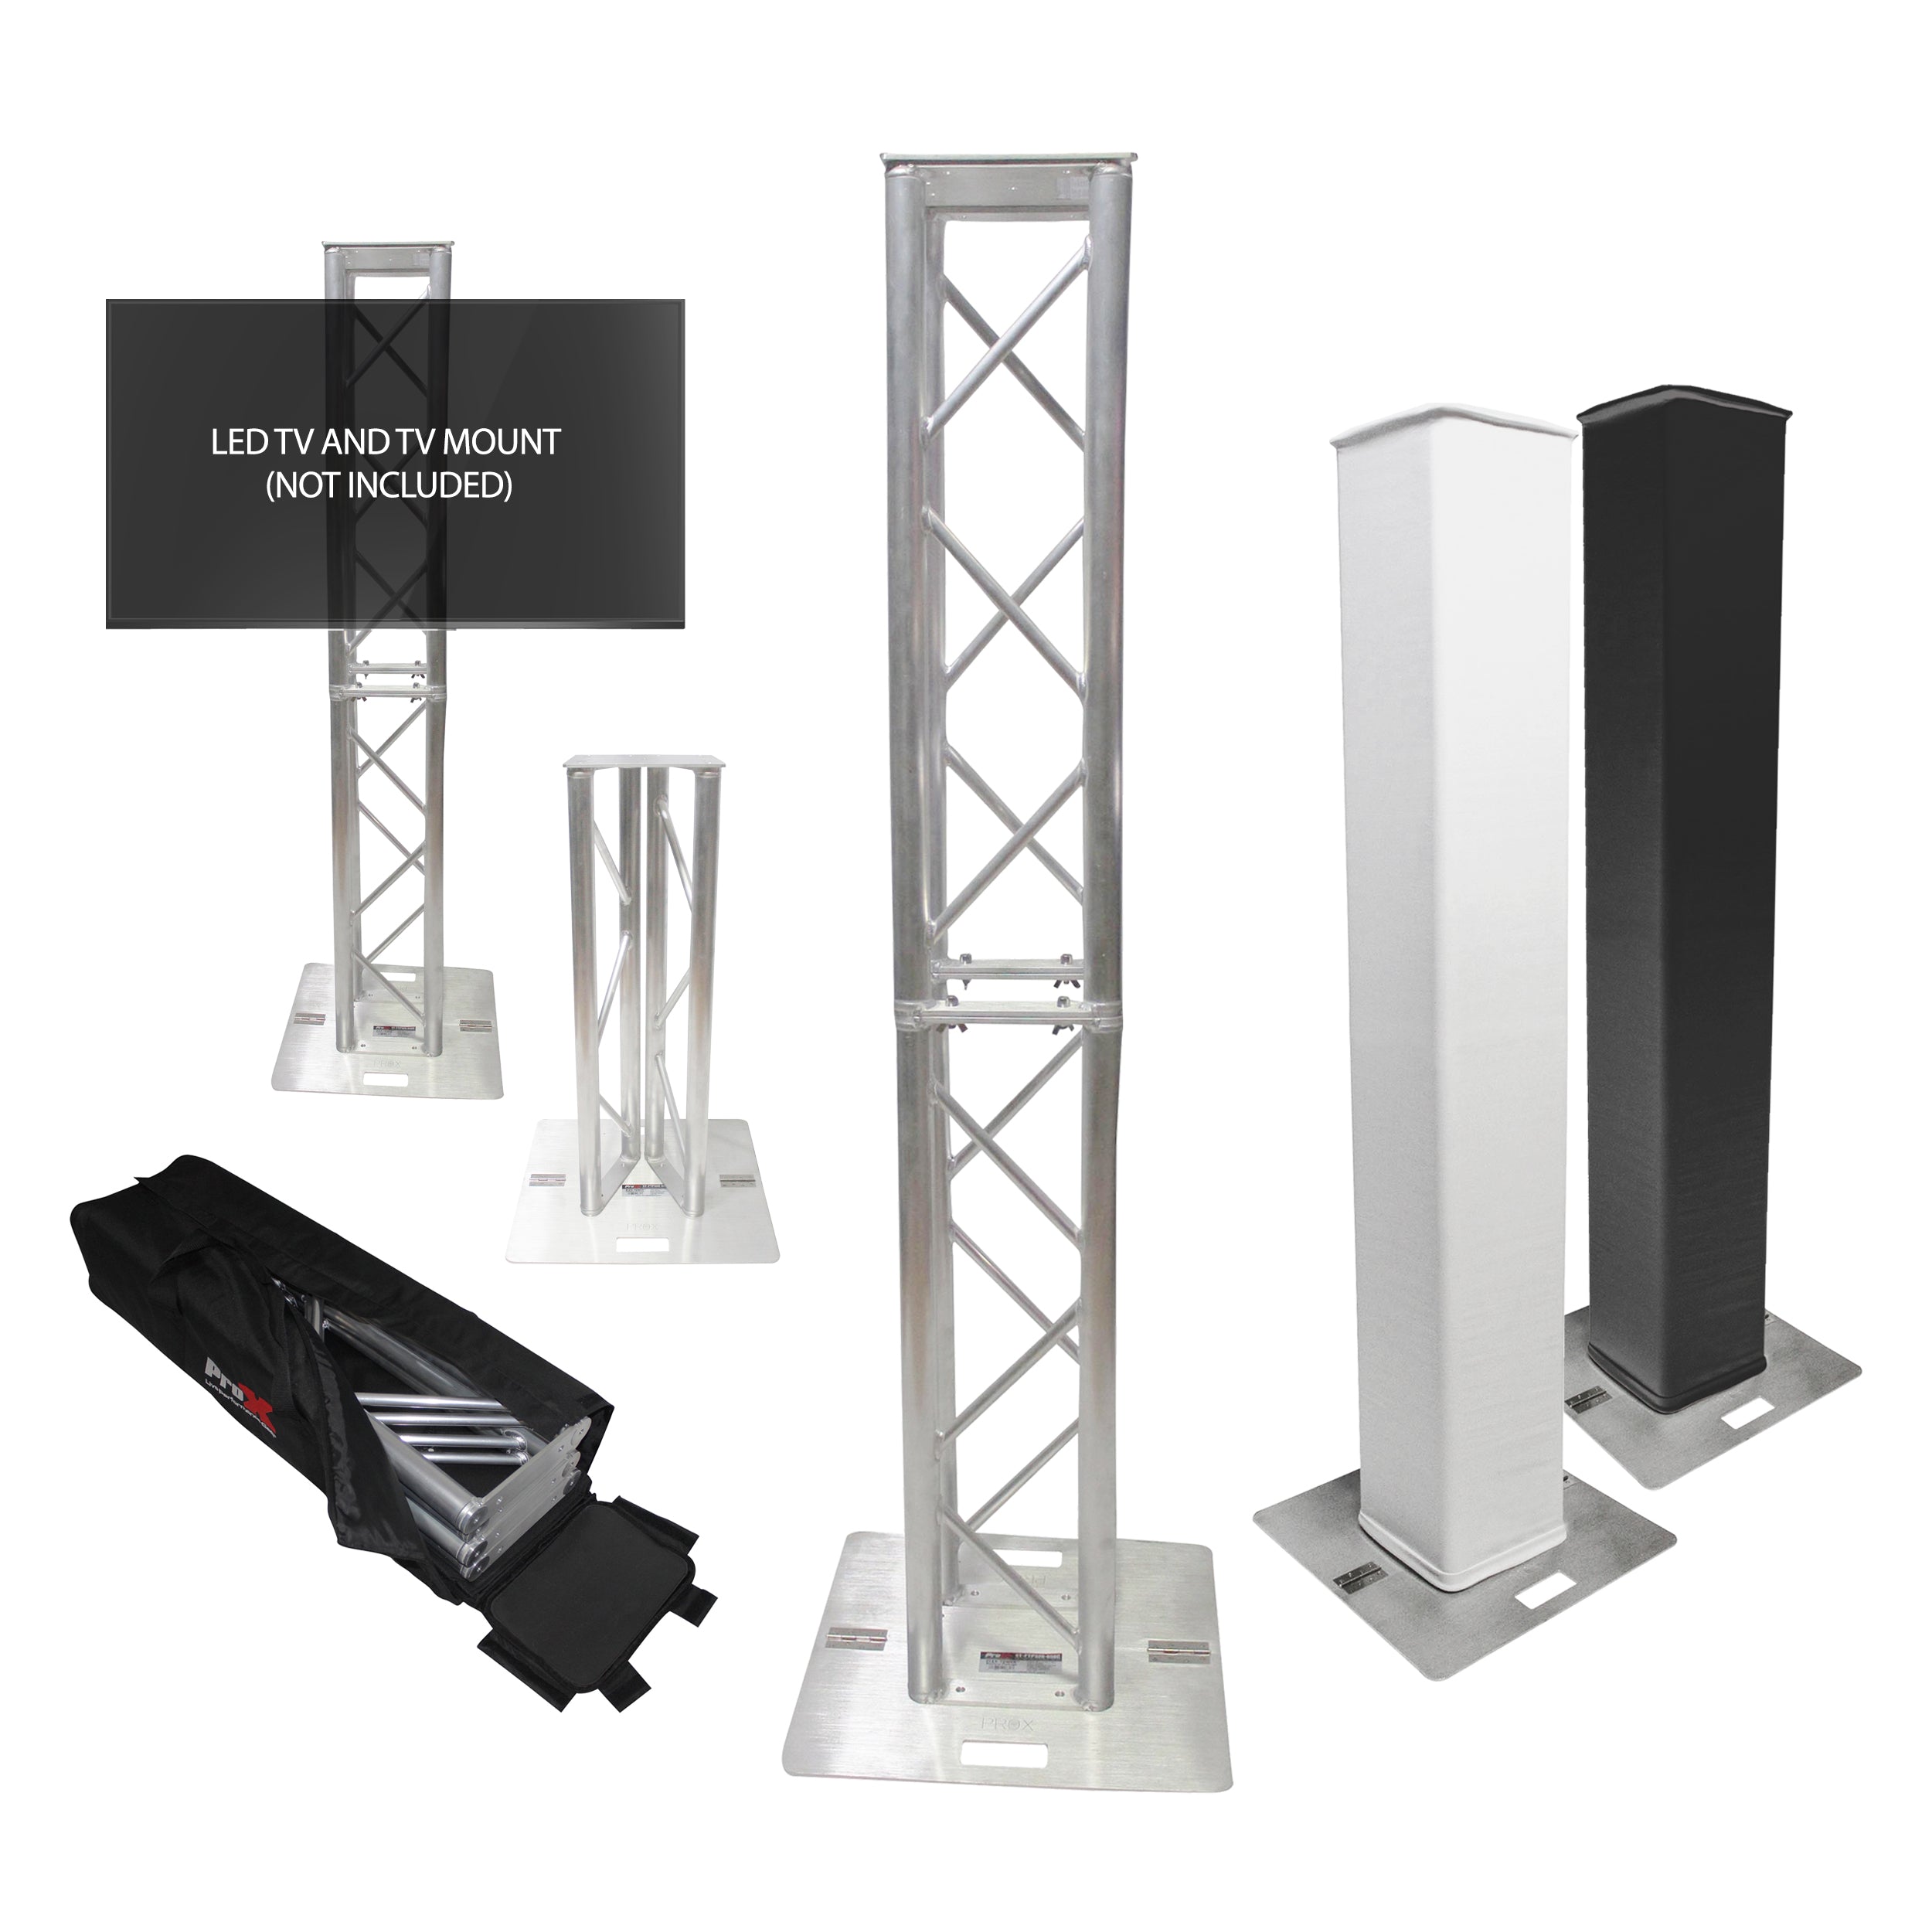 Pro X Flex Tower Totem Package - Adjustable 6.56ft or 3.28ft With Soft Carrying Bag XT-FTP328-656-B